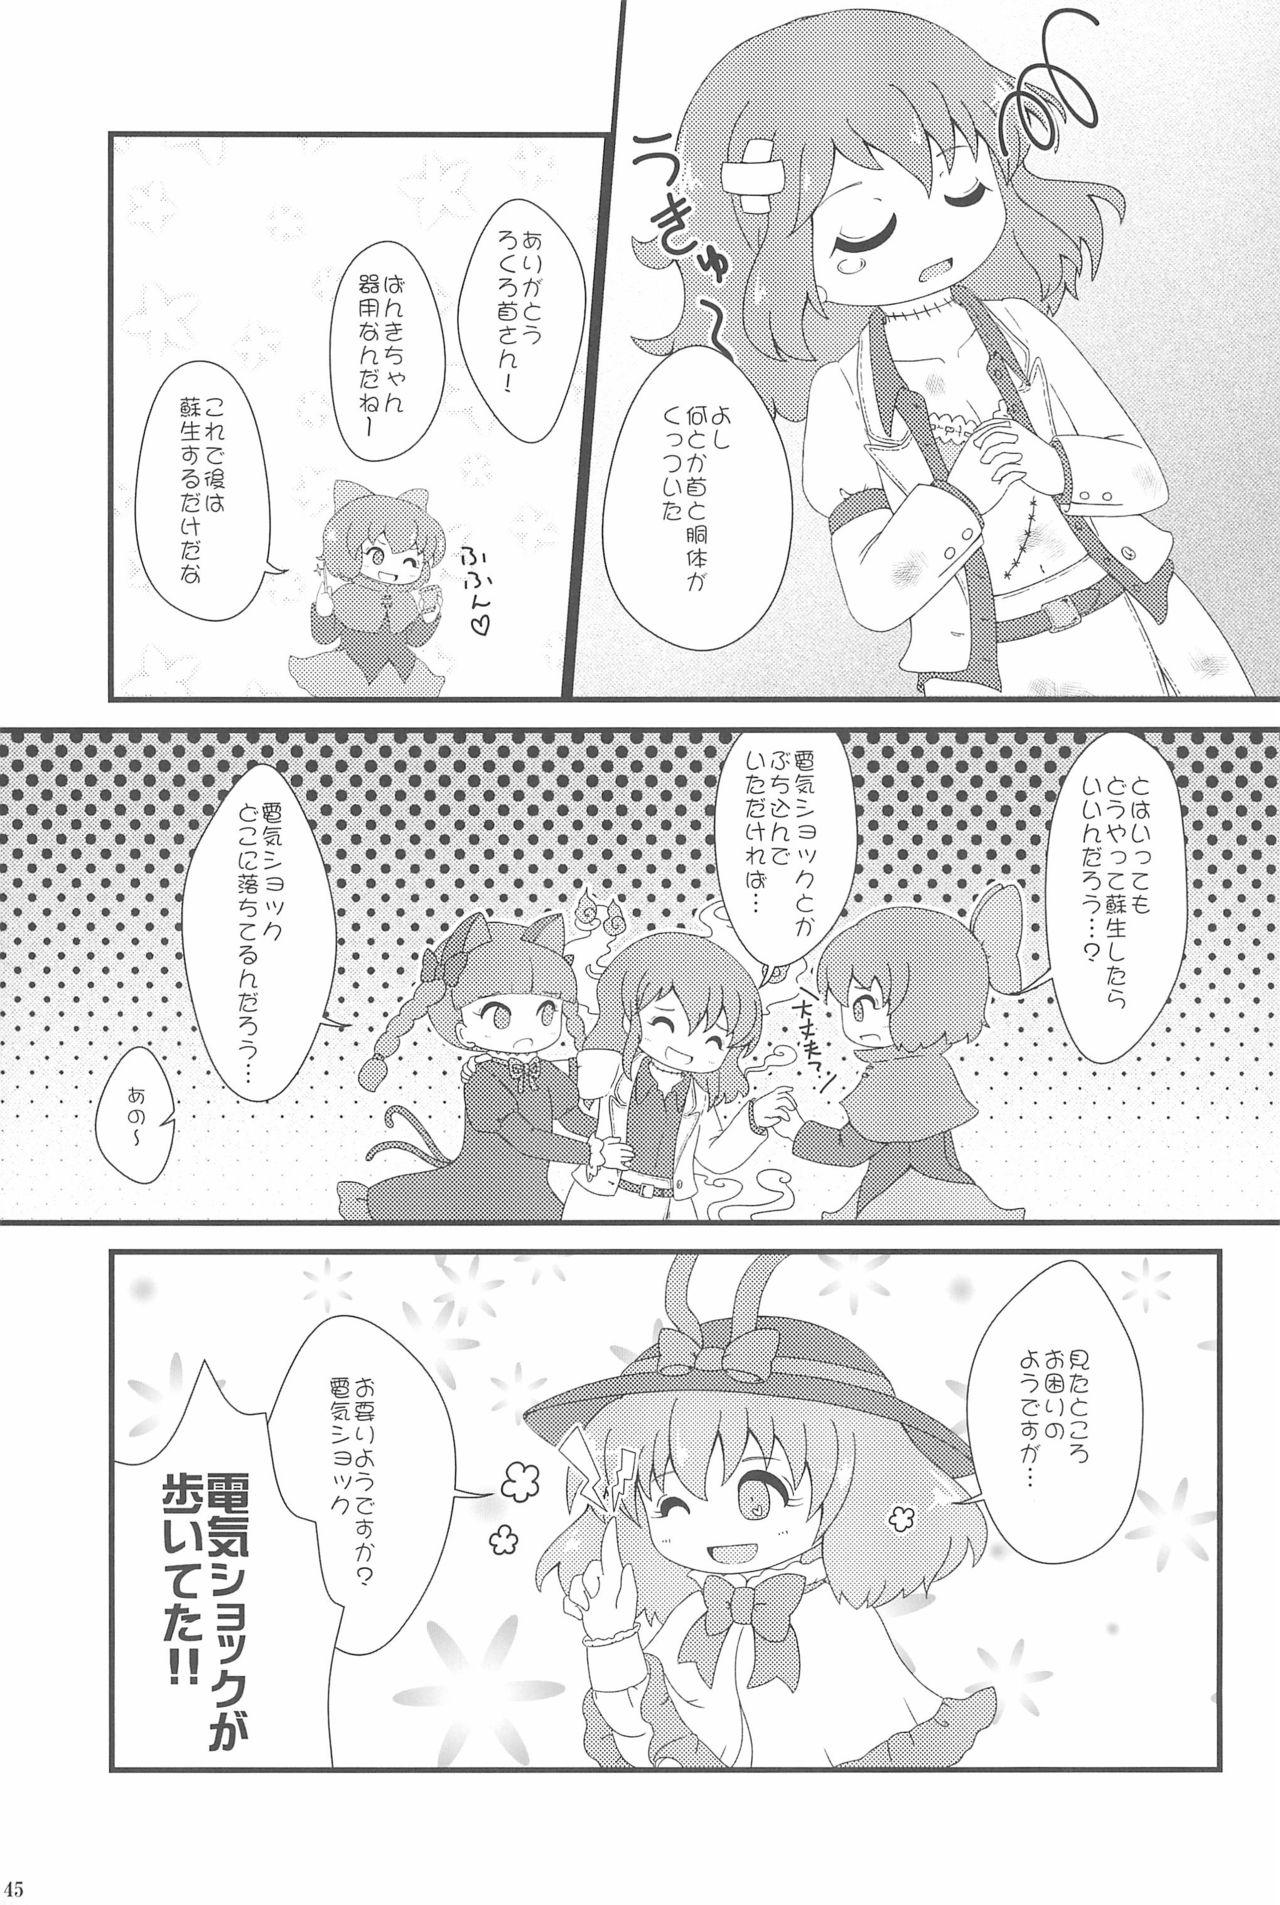 Touhou Roadkill Joint Publication 44